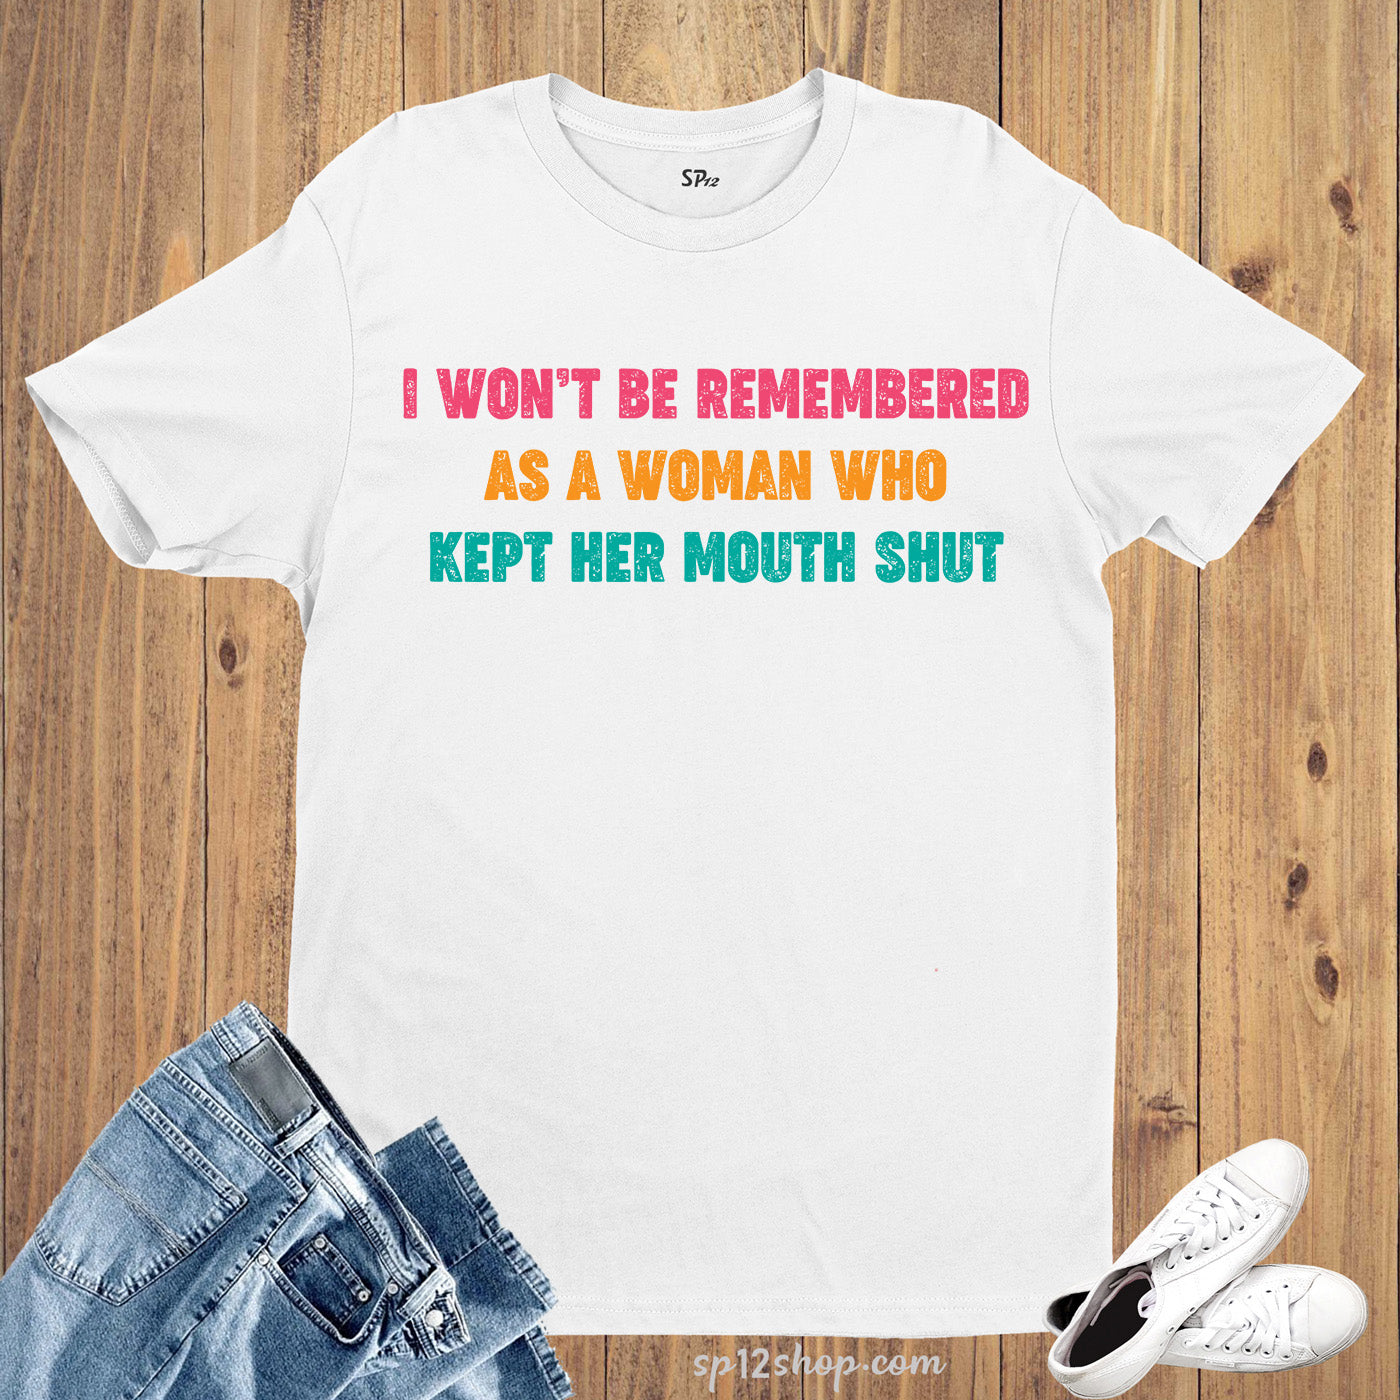 Feminist Shirts I Won't Be Remembered As A Woman Who Kept Her Mouth Shut Tees